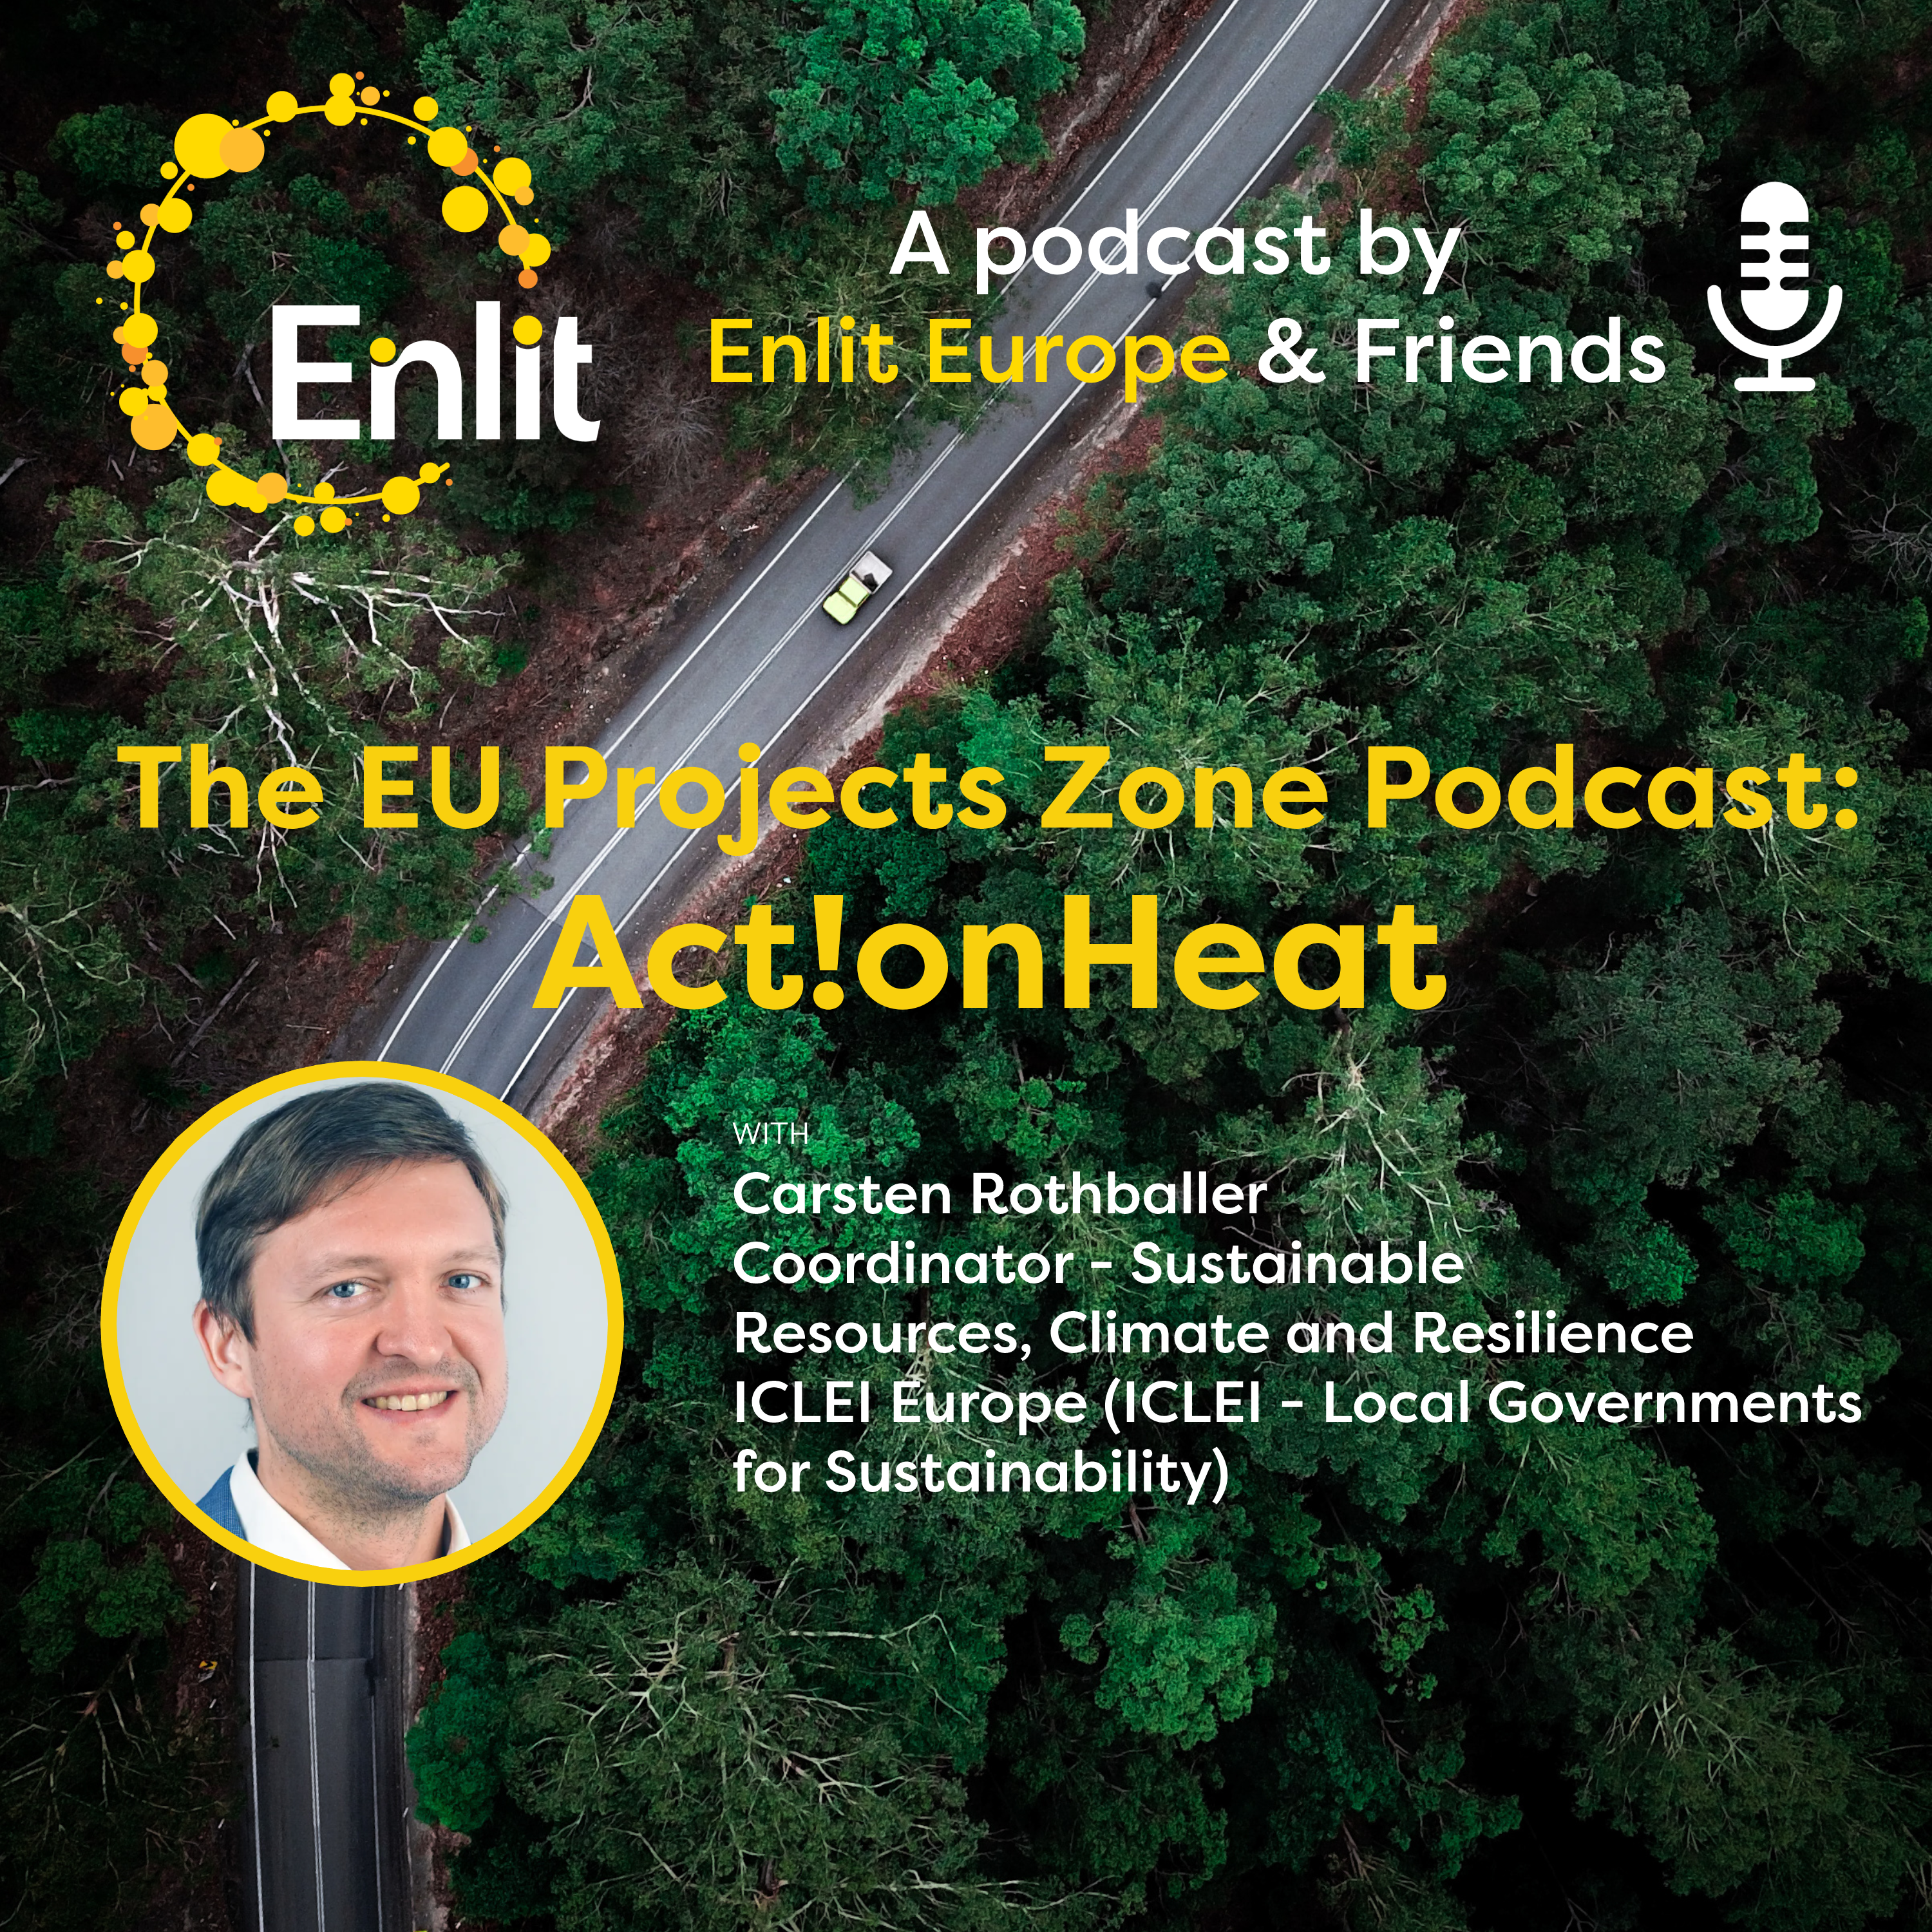 The EU Projects Zone Podcast: Act!onHeat with Carsten Rothballer